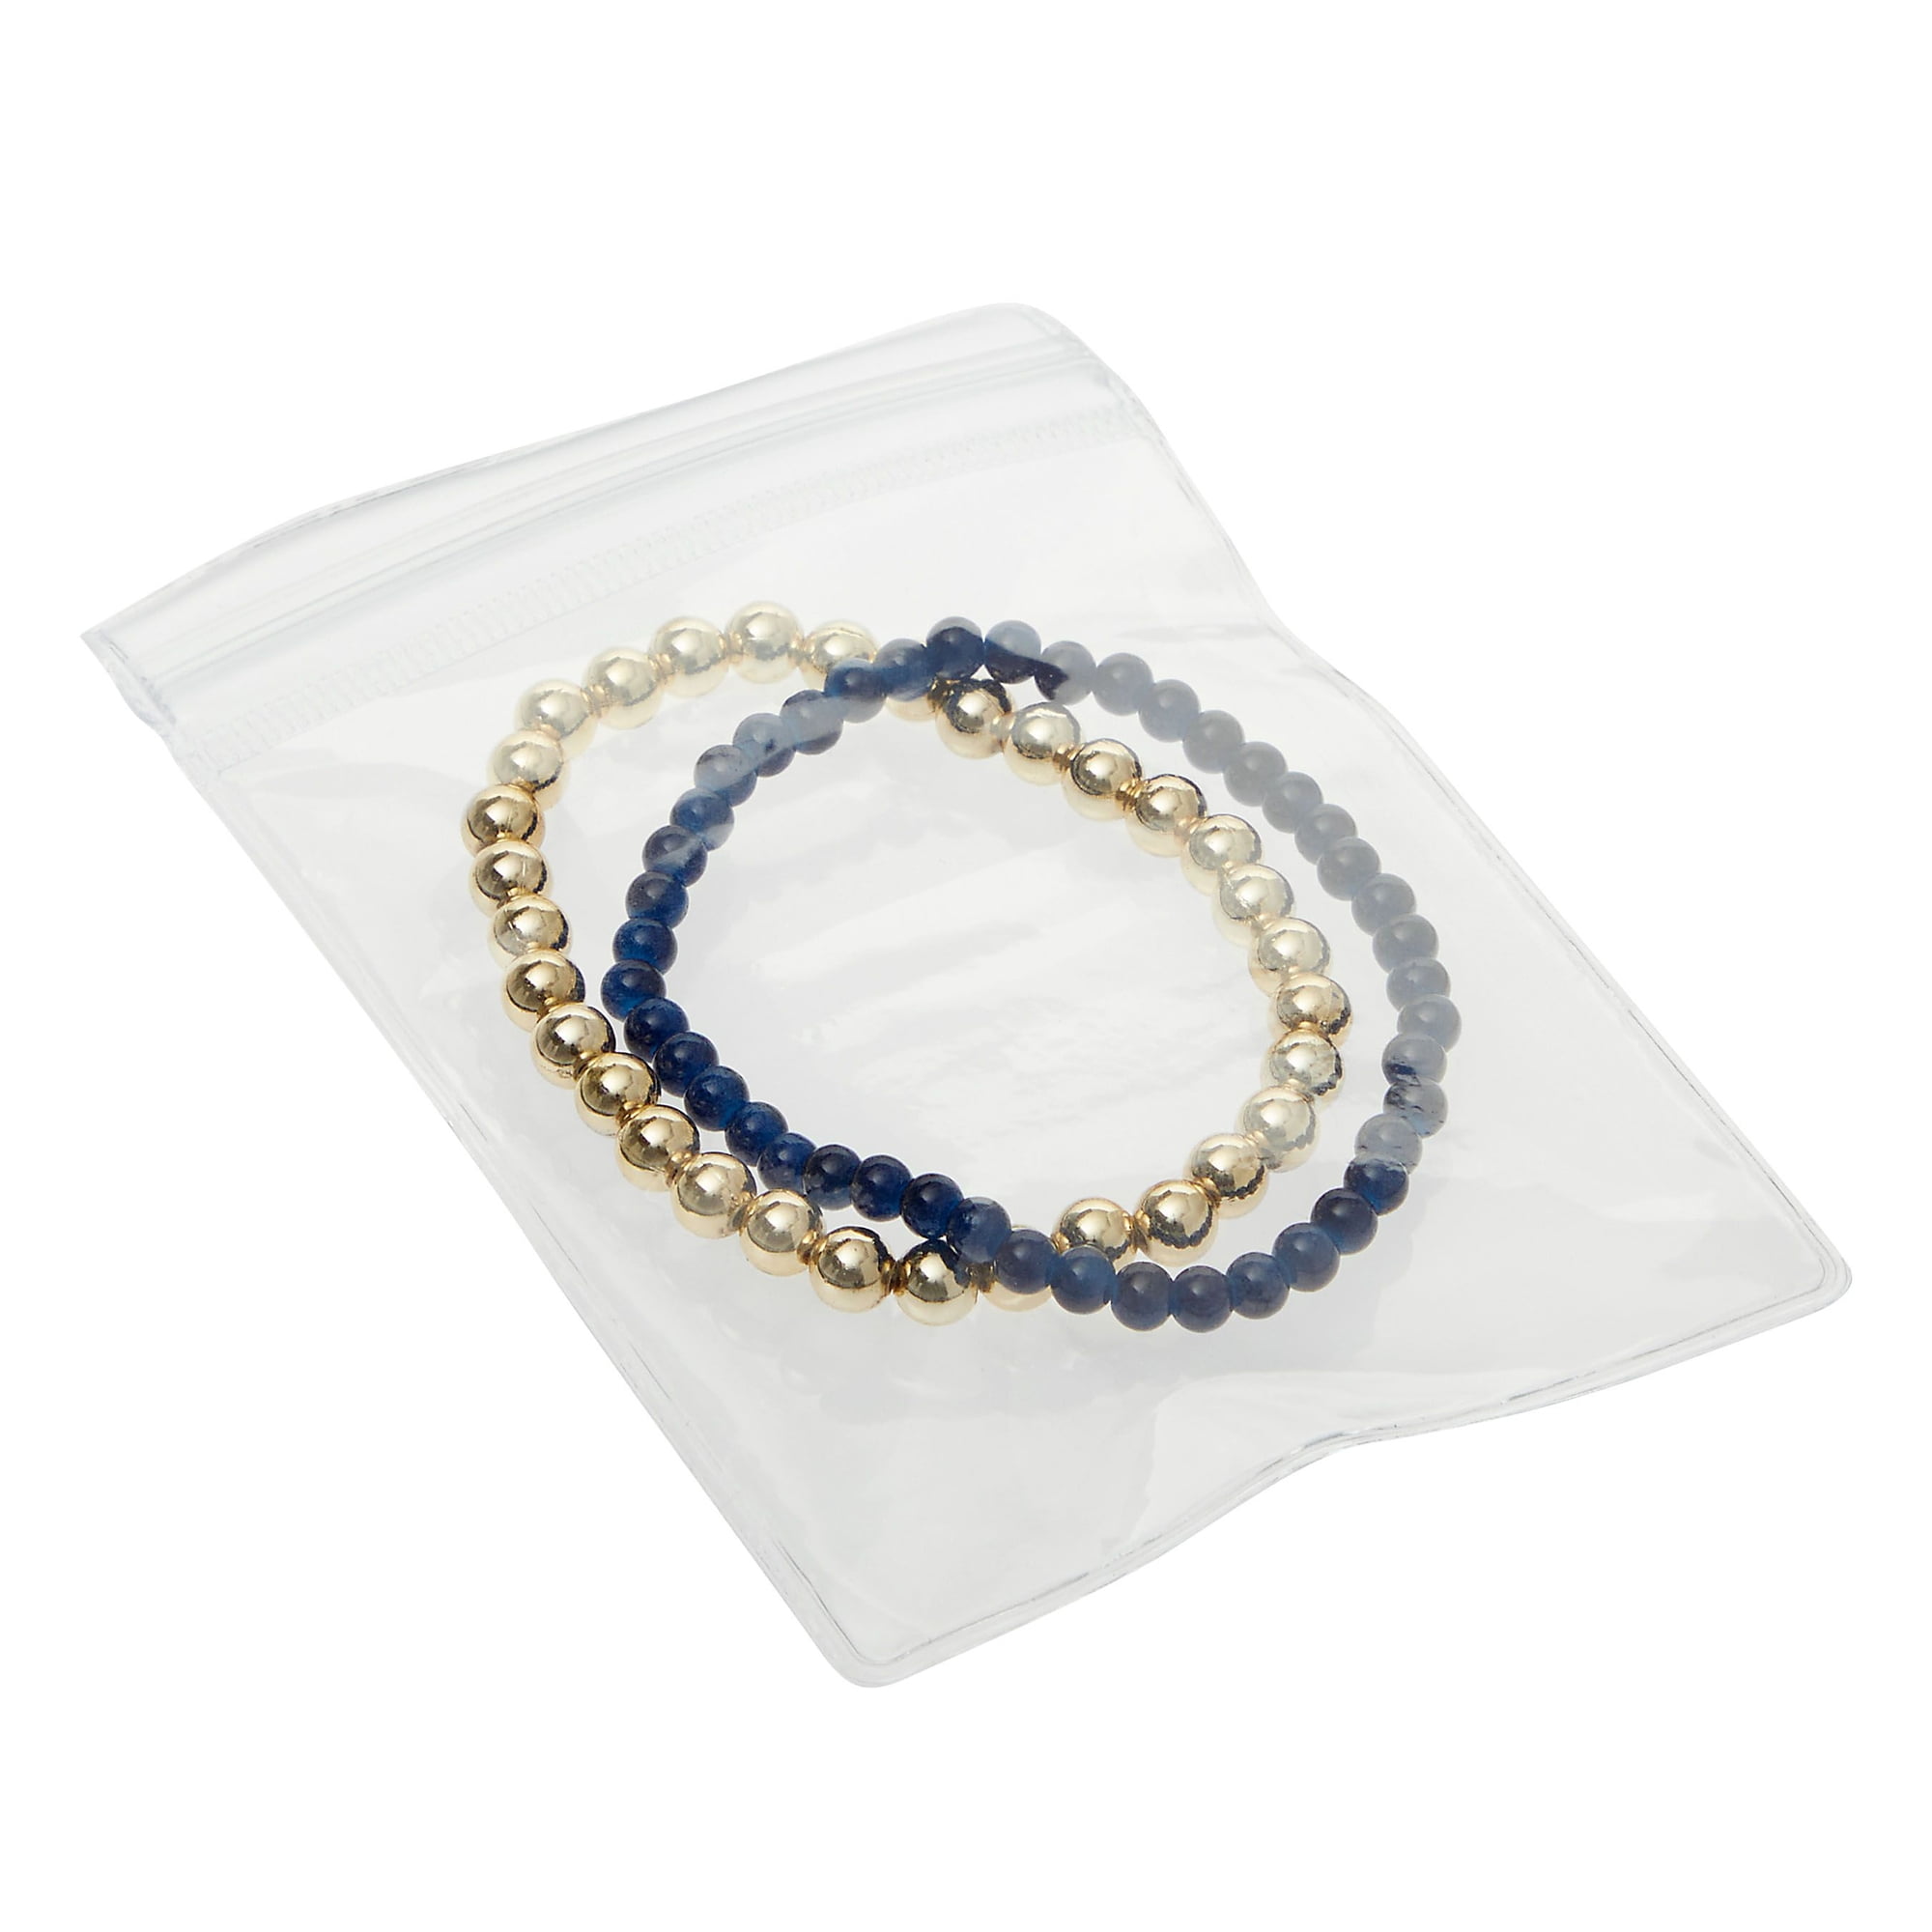 Resealable Bags 3x5 Inches Resealable Jewelry Bags - RB-35 - Qty 100